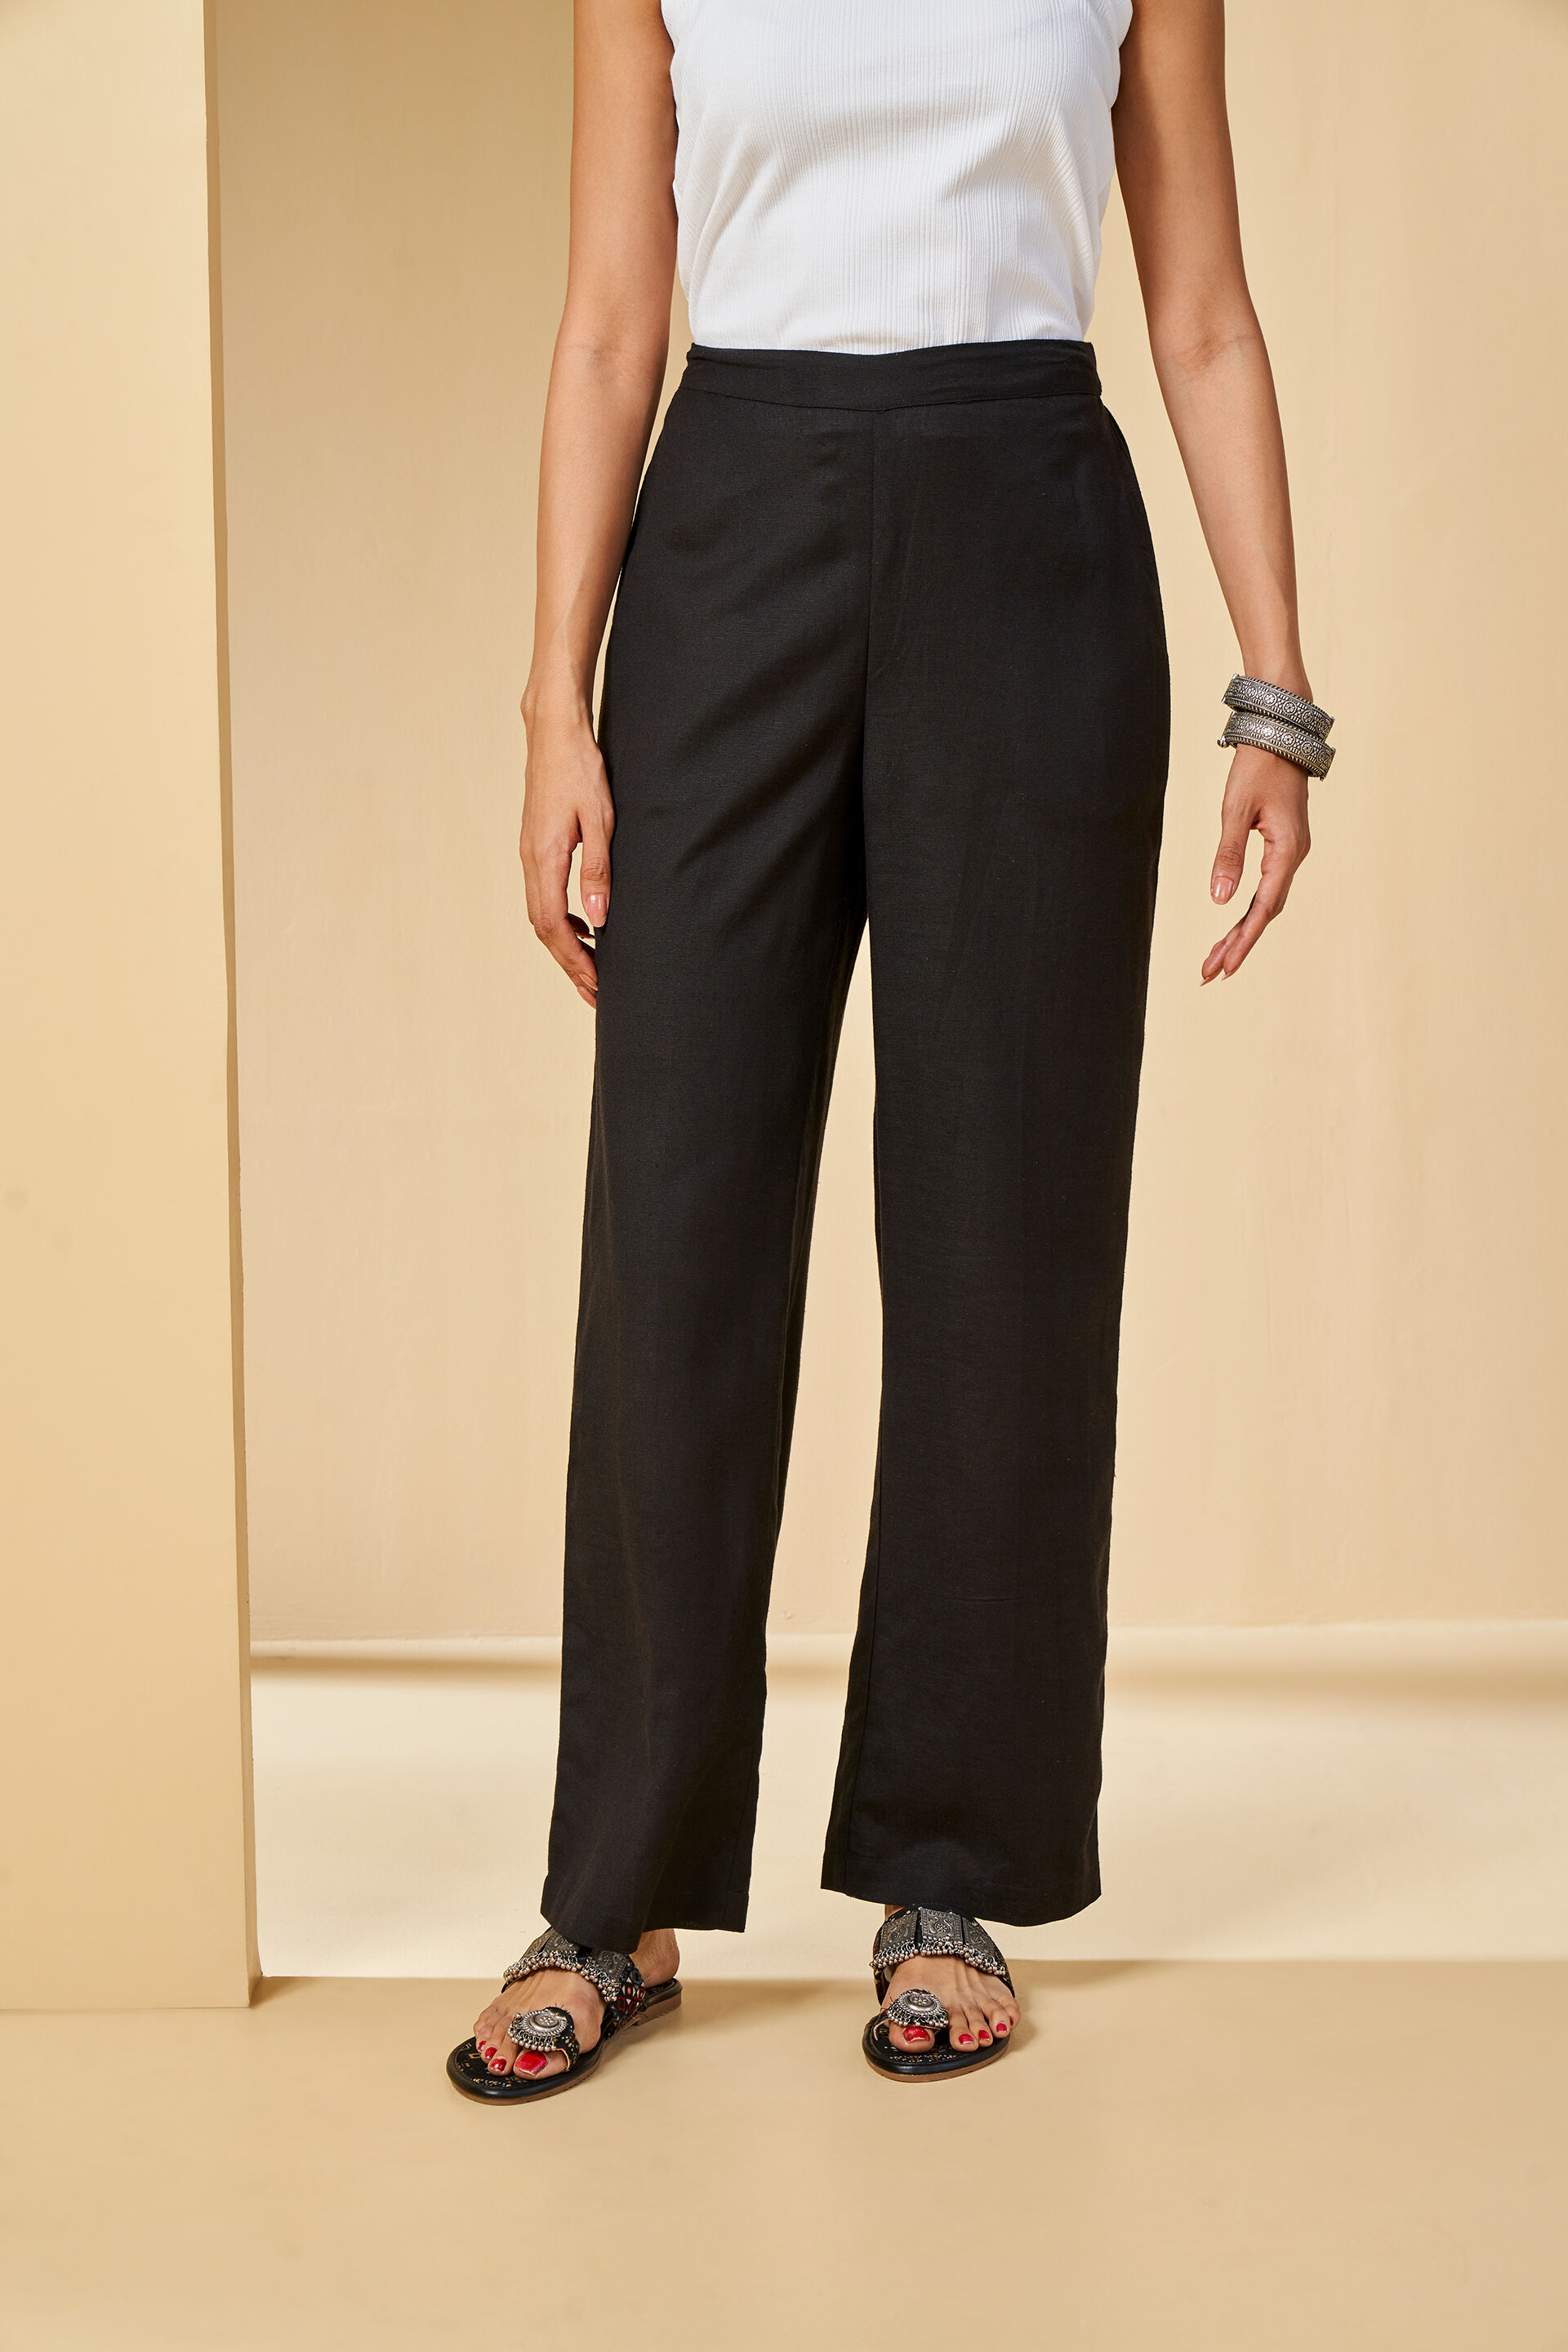 Shop Women's Pants for Every Occasion - QVC.com